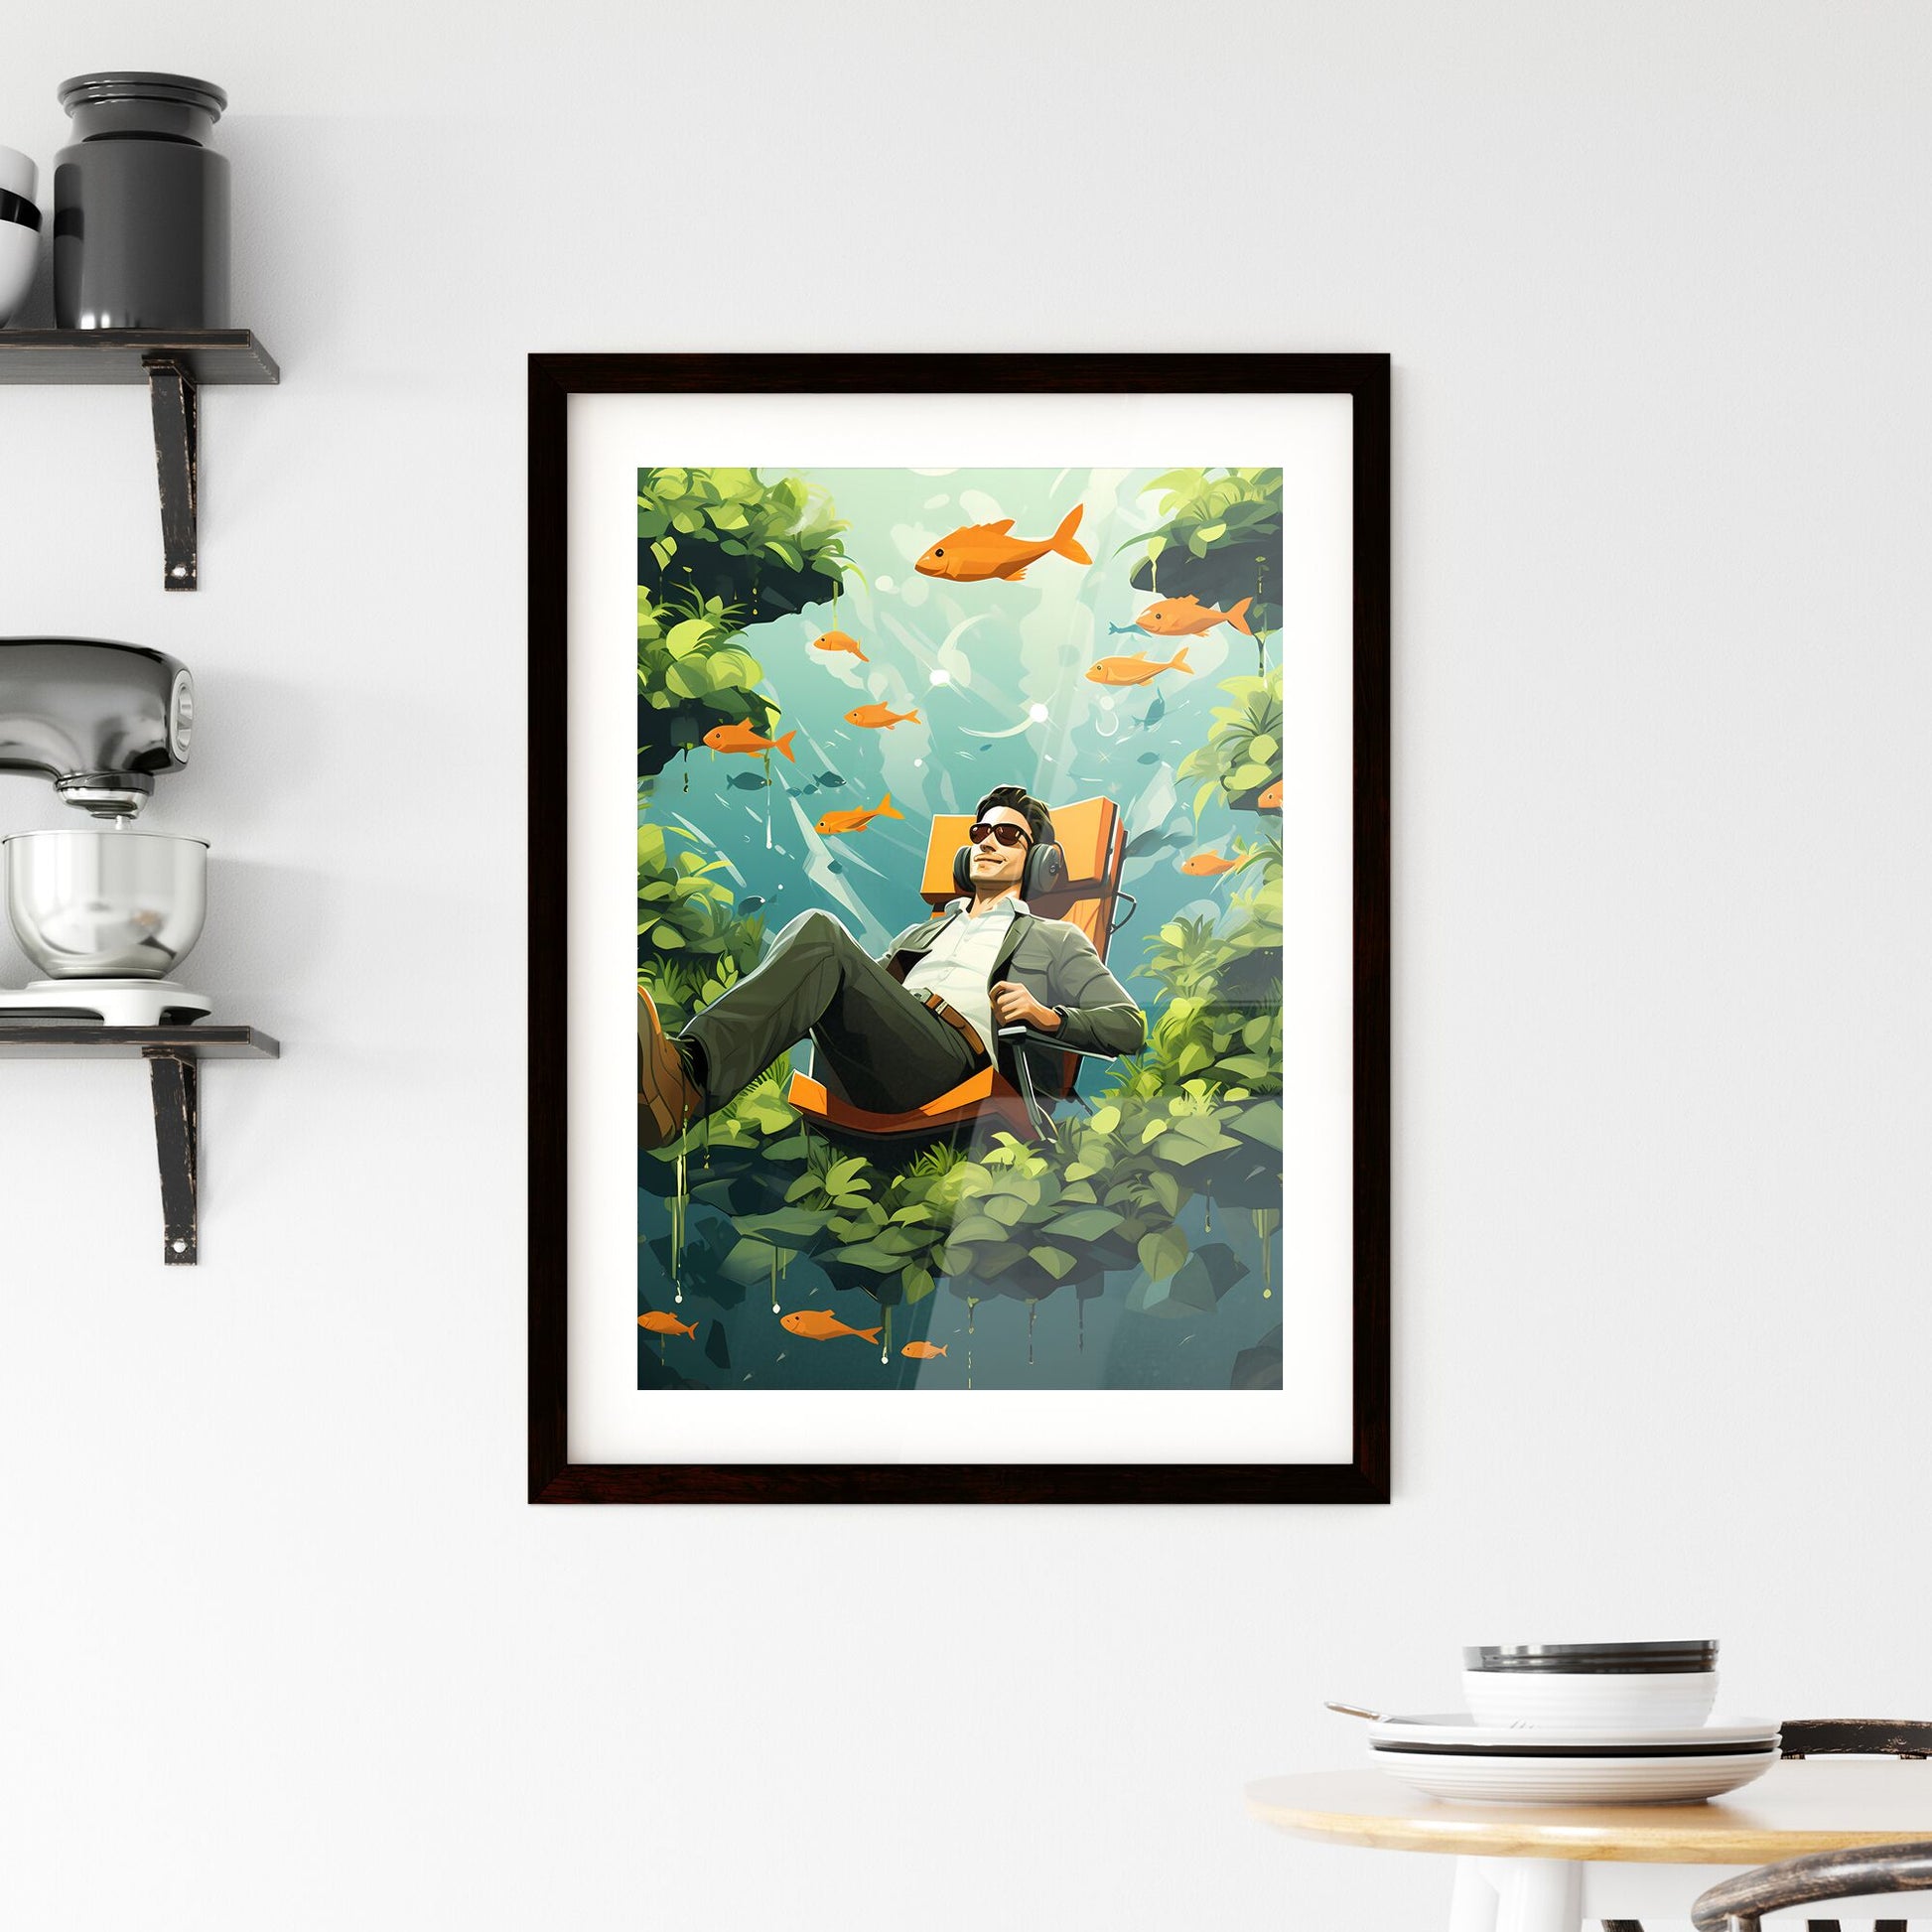 Today, your inner voice is louder and clearer - Art print of a man sitting in a chair surrounded by plants and goldfish Default Title